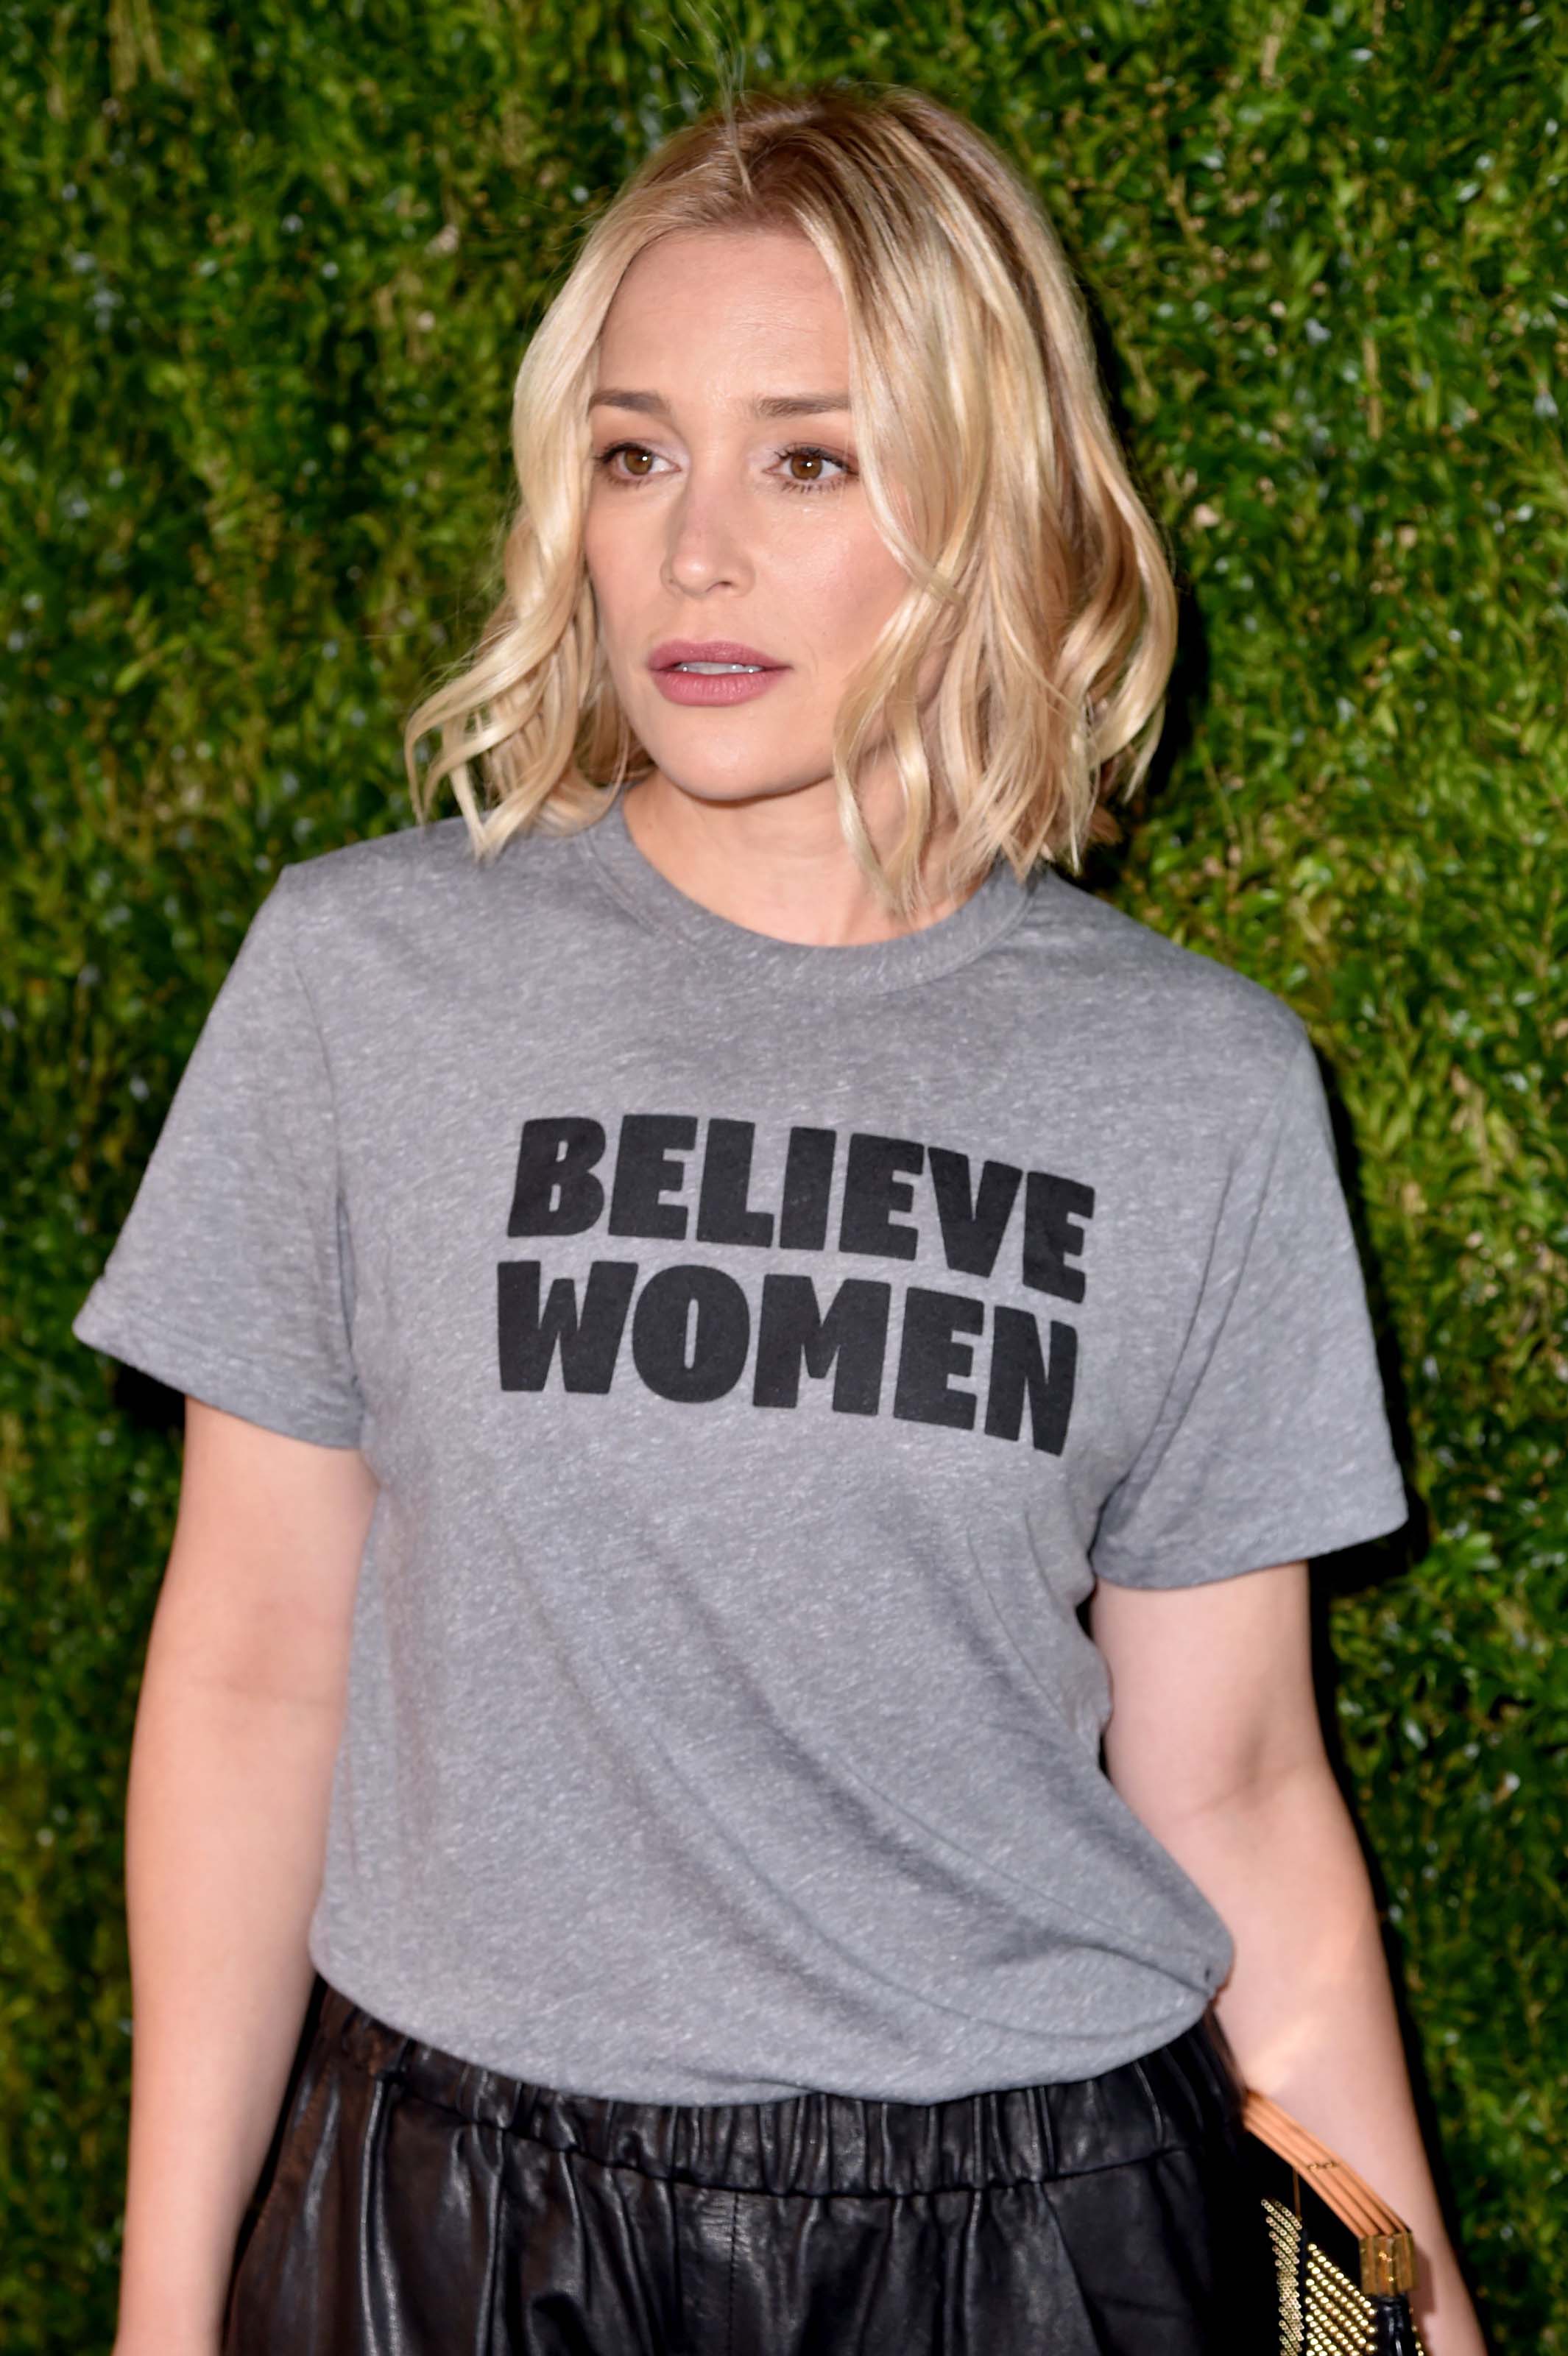 Piper Perabo attends Through Her Lens The Tribeca